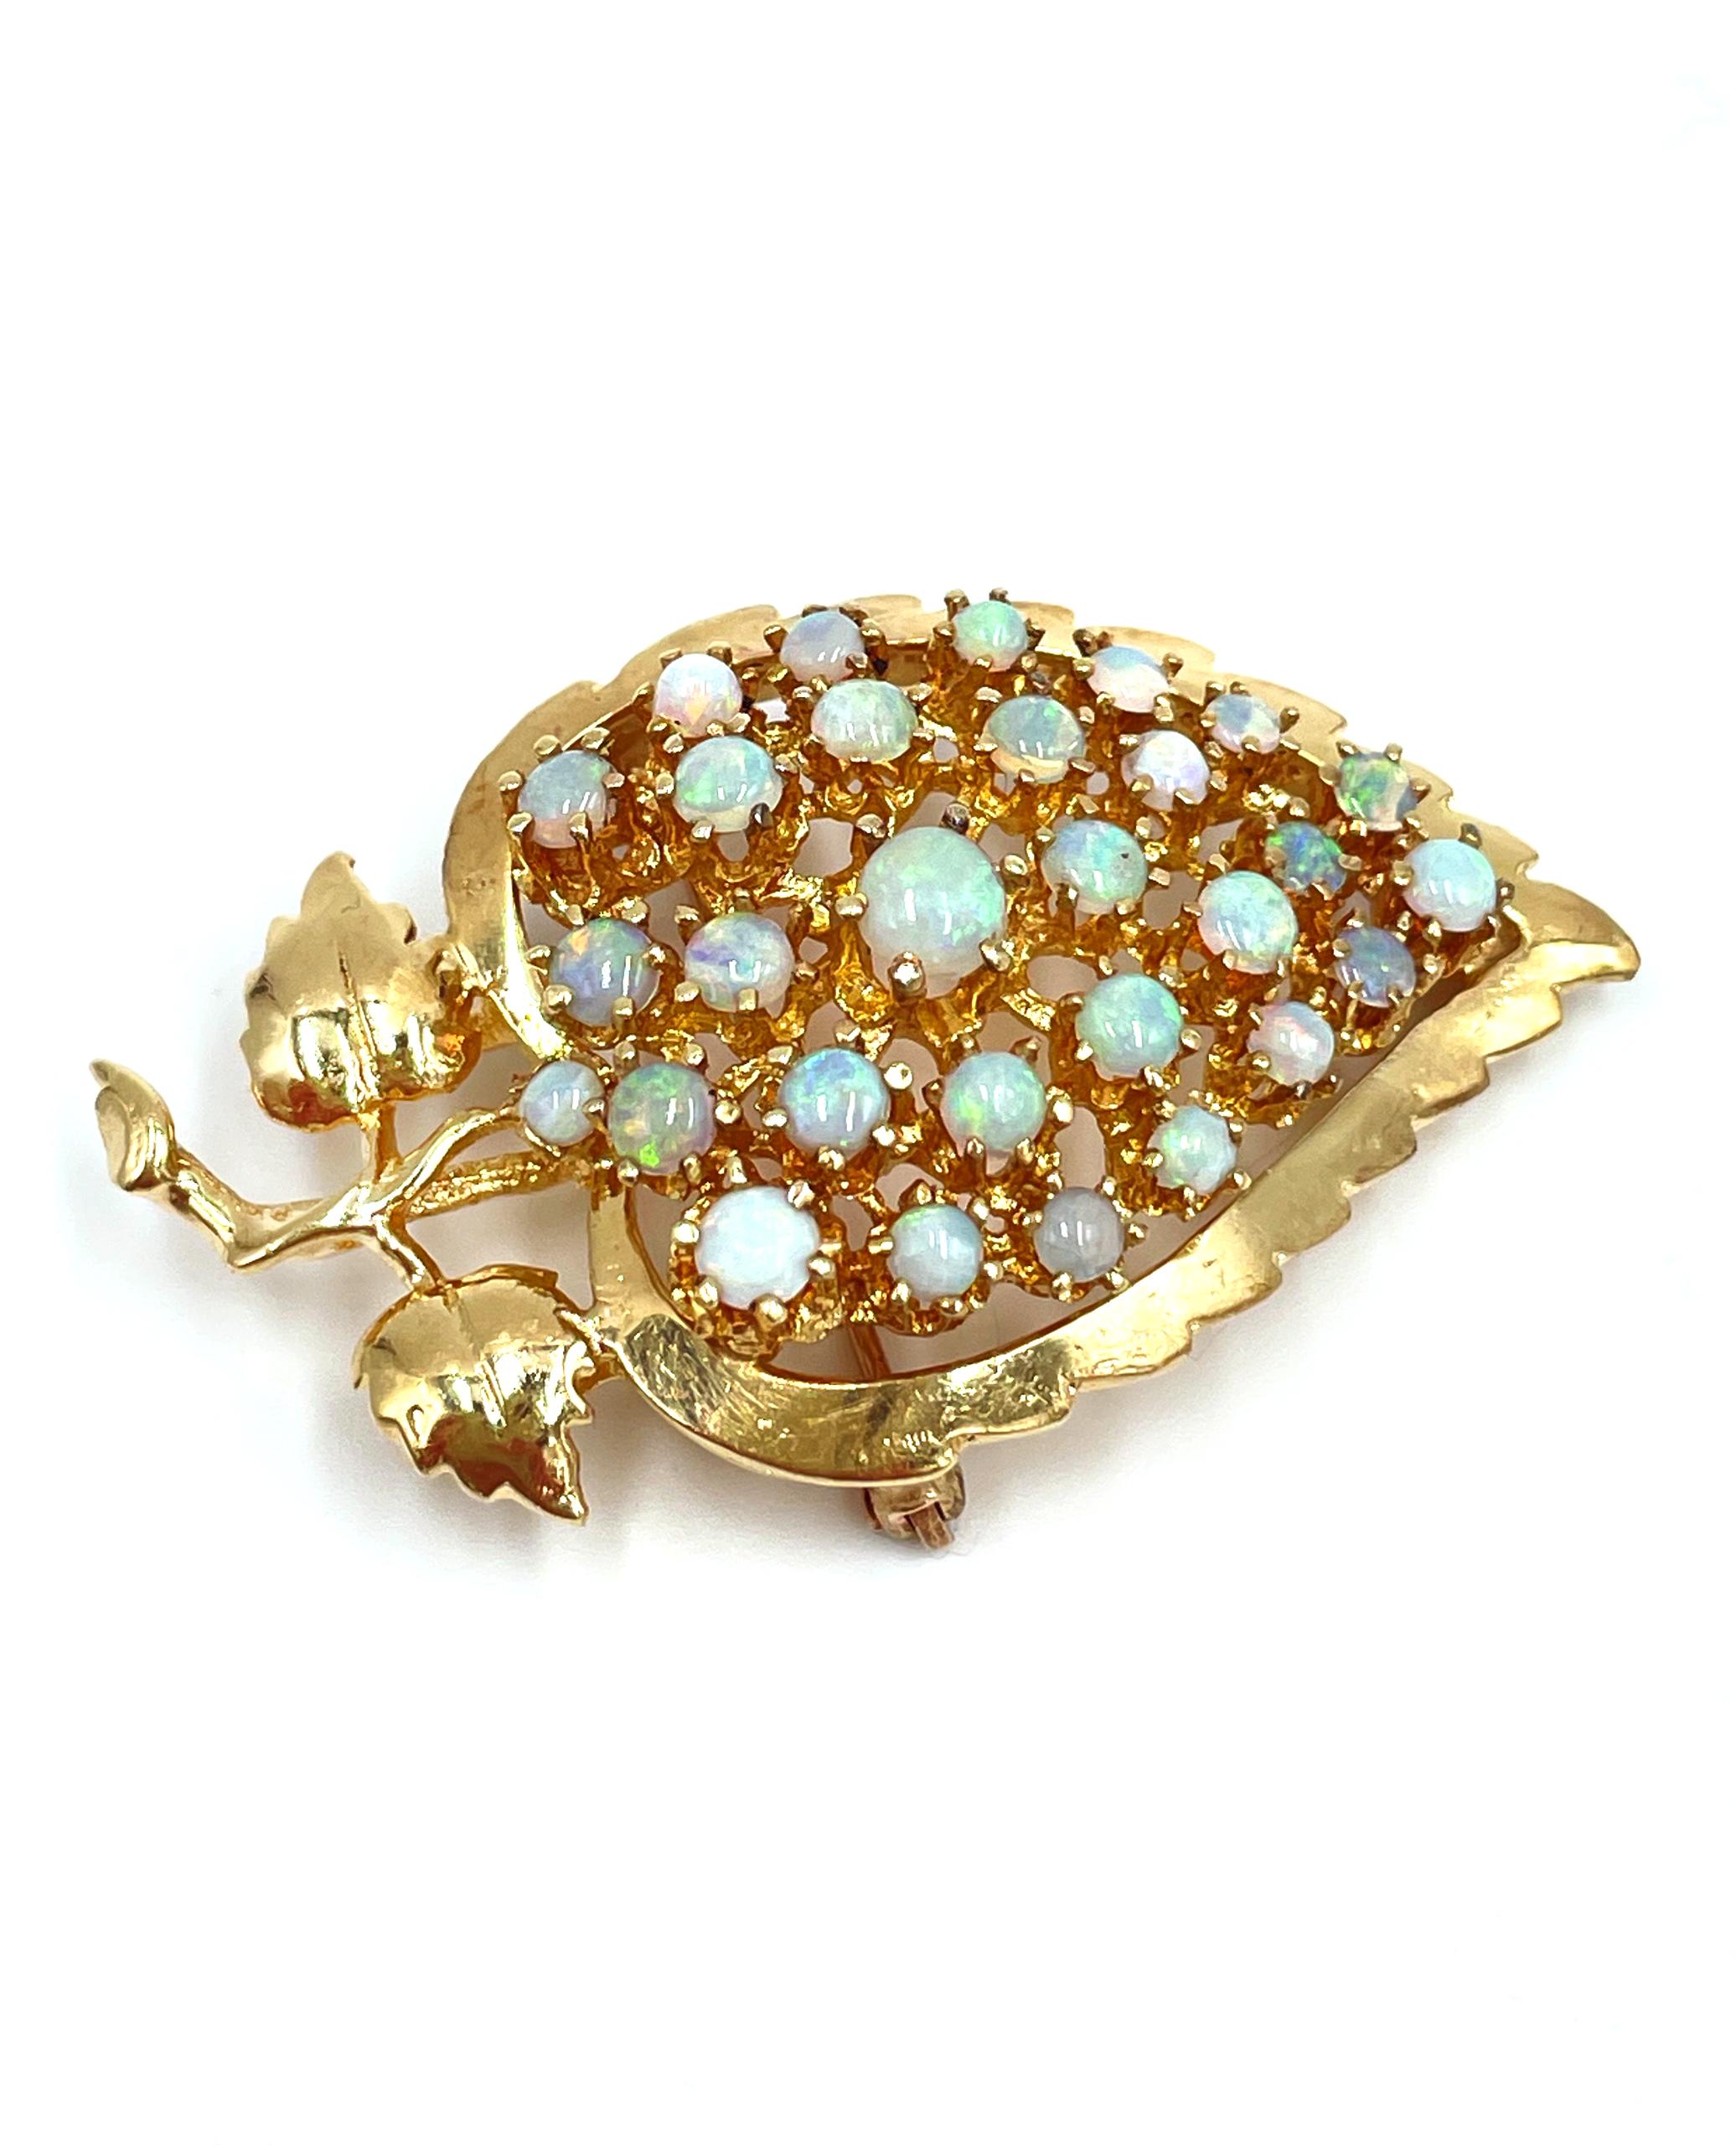 Cabochon Preowned 14K Yellow Gold Brooch Pin / Pendant with Opals Circa 1960s For Sale